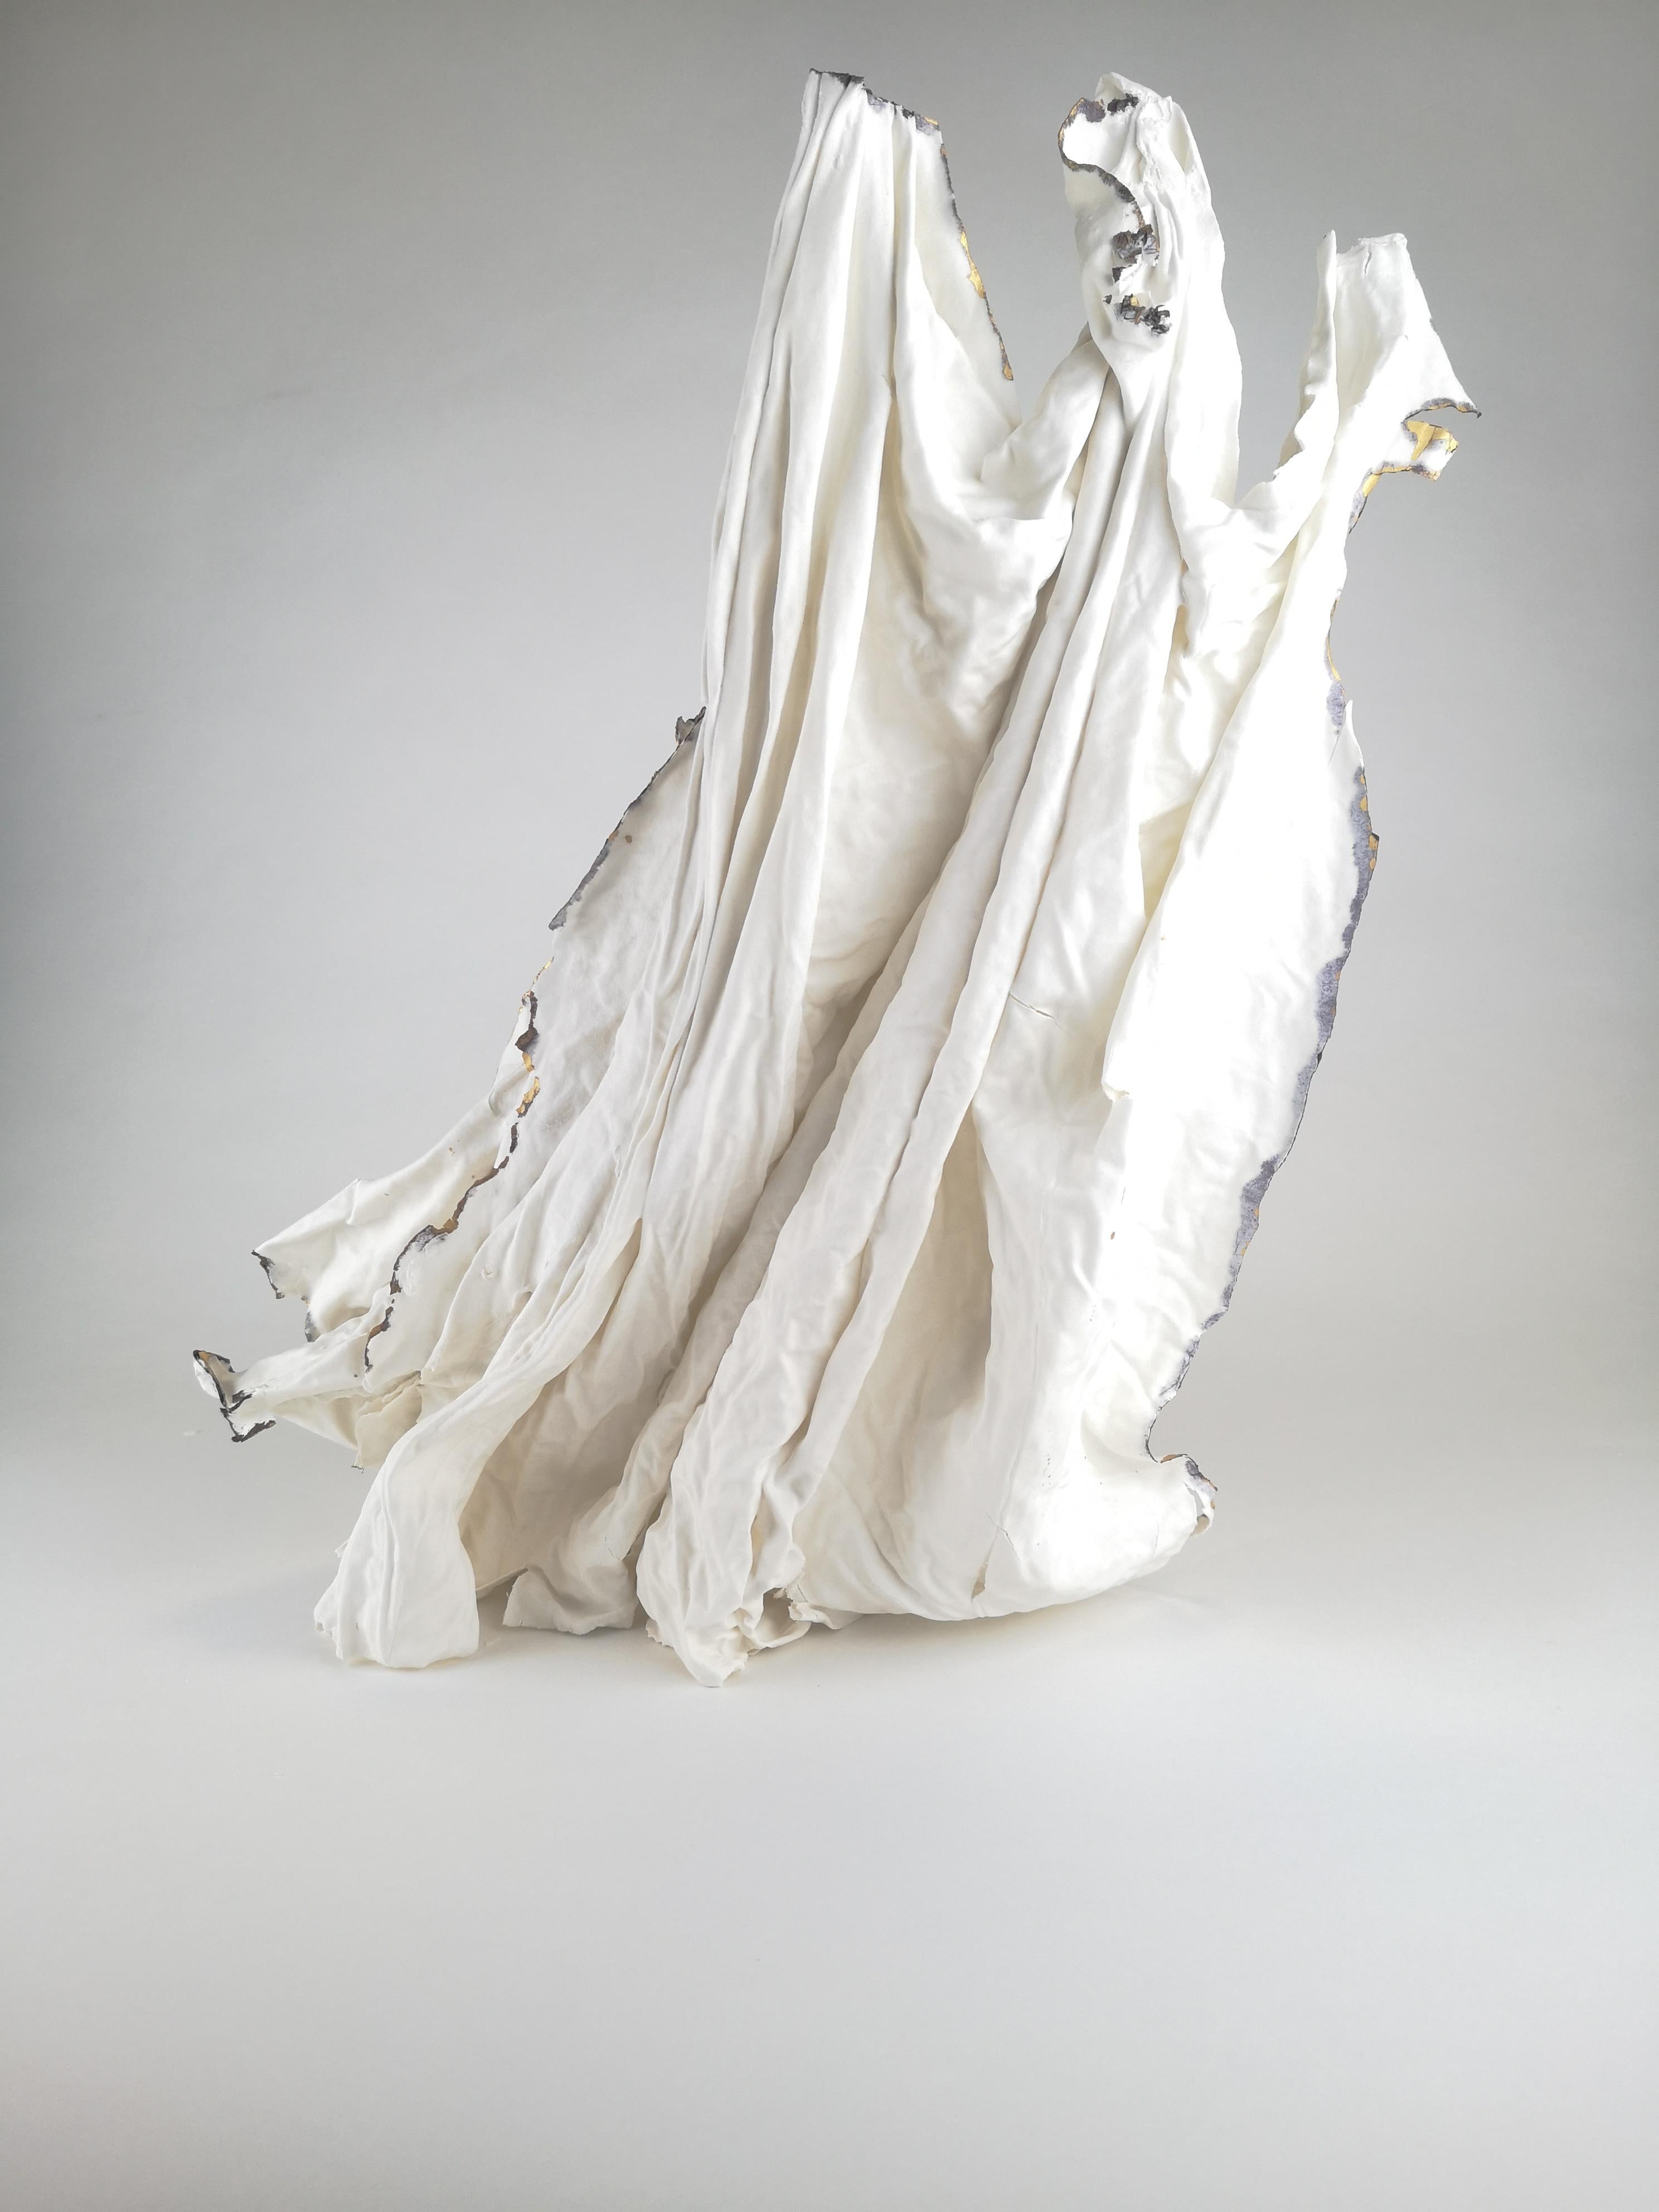 Hidden Legacy Sculpture by Dora Stanczel
One of a Kind.
Dimensions: D 26 x W 43 x H 45 cm.
Materials: Porcelain and gold.

I create bespoke and luxurious porcelain pieces with a careful aesthetic. Beyond the technical mastery of casting, what